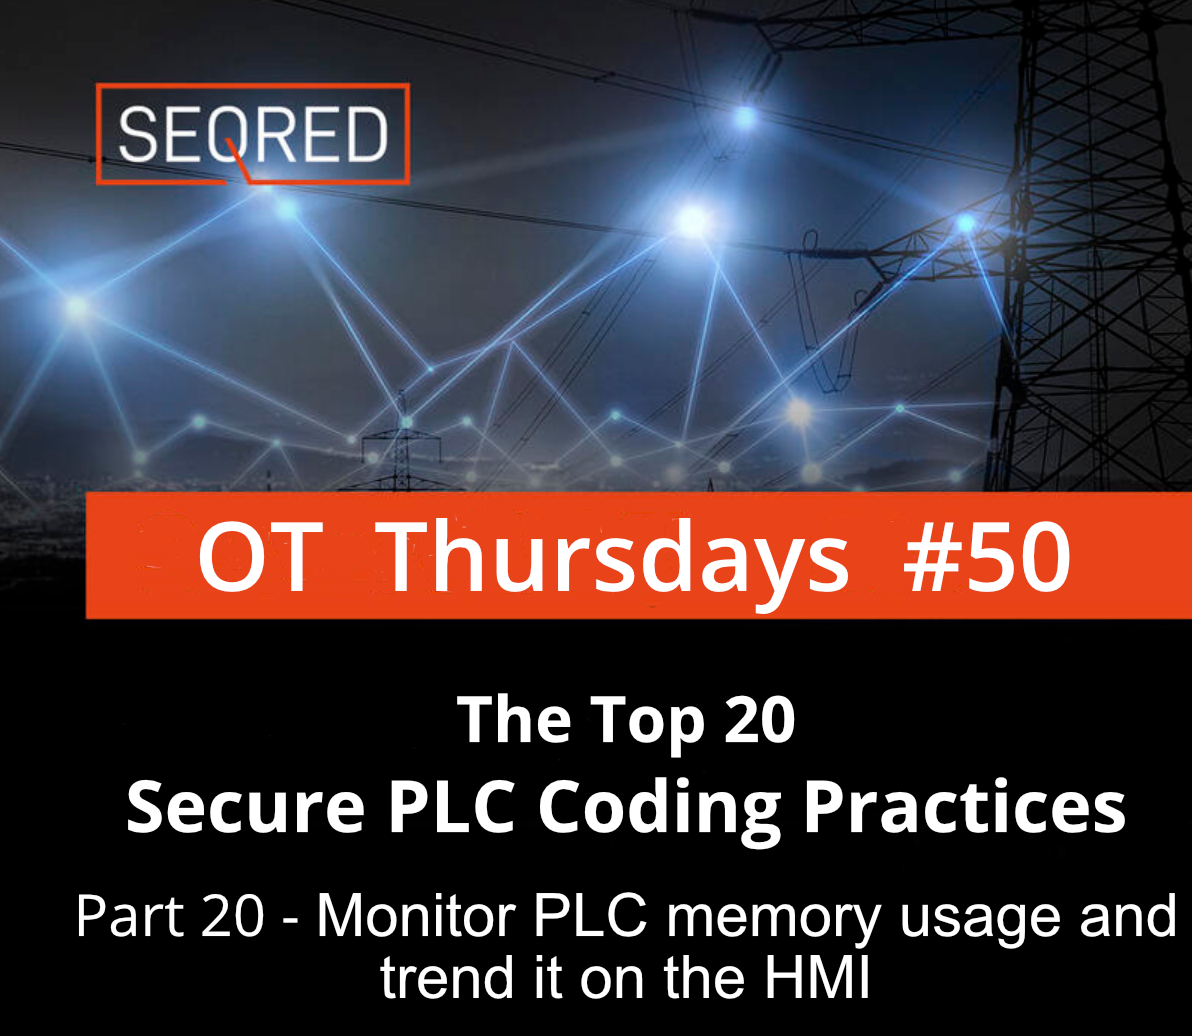 The Top 20 Secure PLC Coding Practices. Part 19 - Monitor PLC memory usage and trend it on the HMI